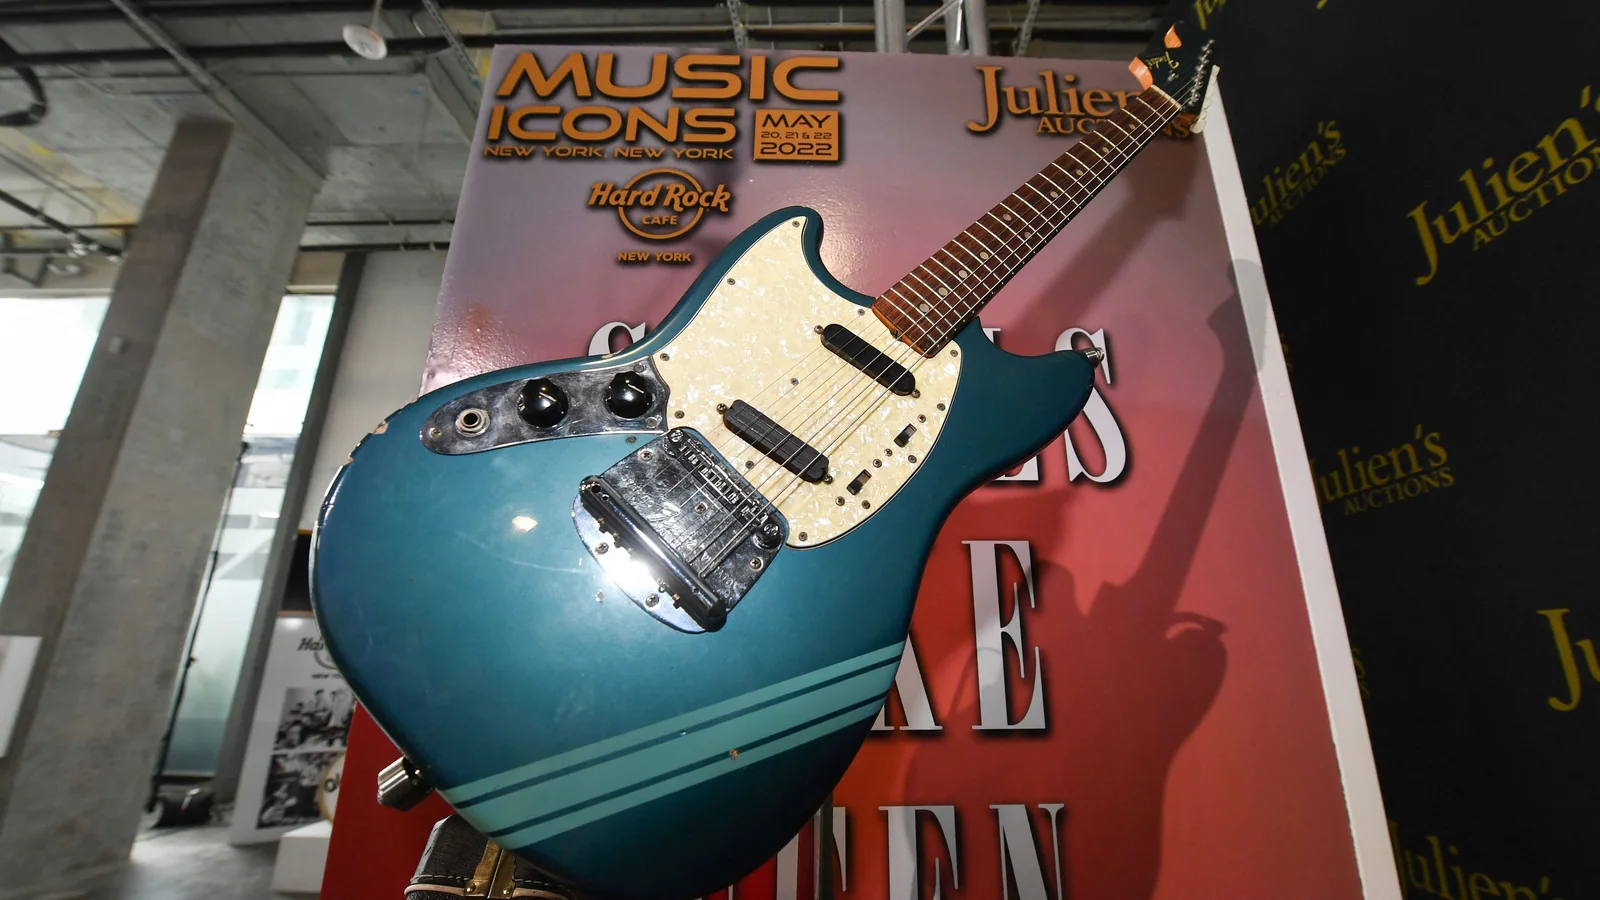 Kurt Cobain’s blue guitar in Nirvana’s Smells Like Teen Spirit video to fetch up to USD 800,000 at auction